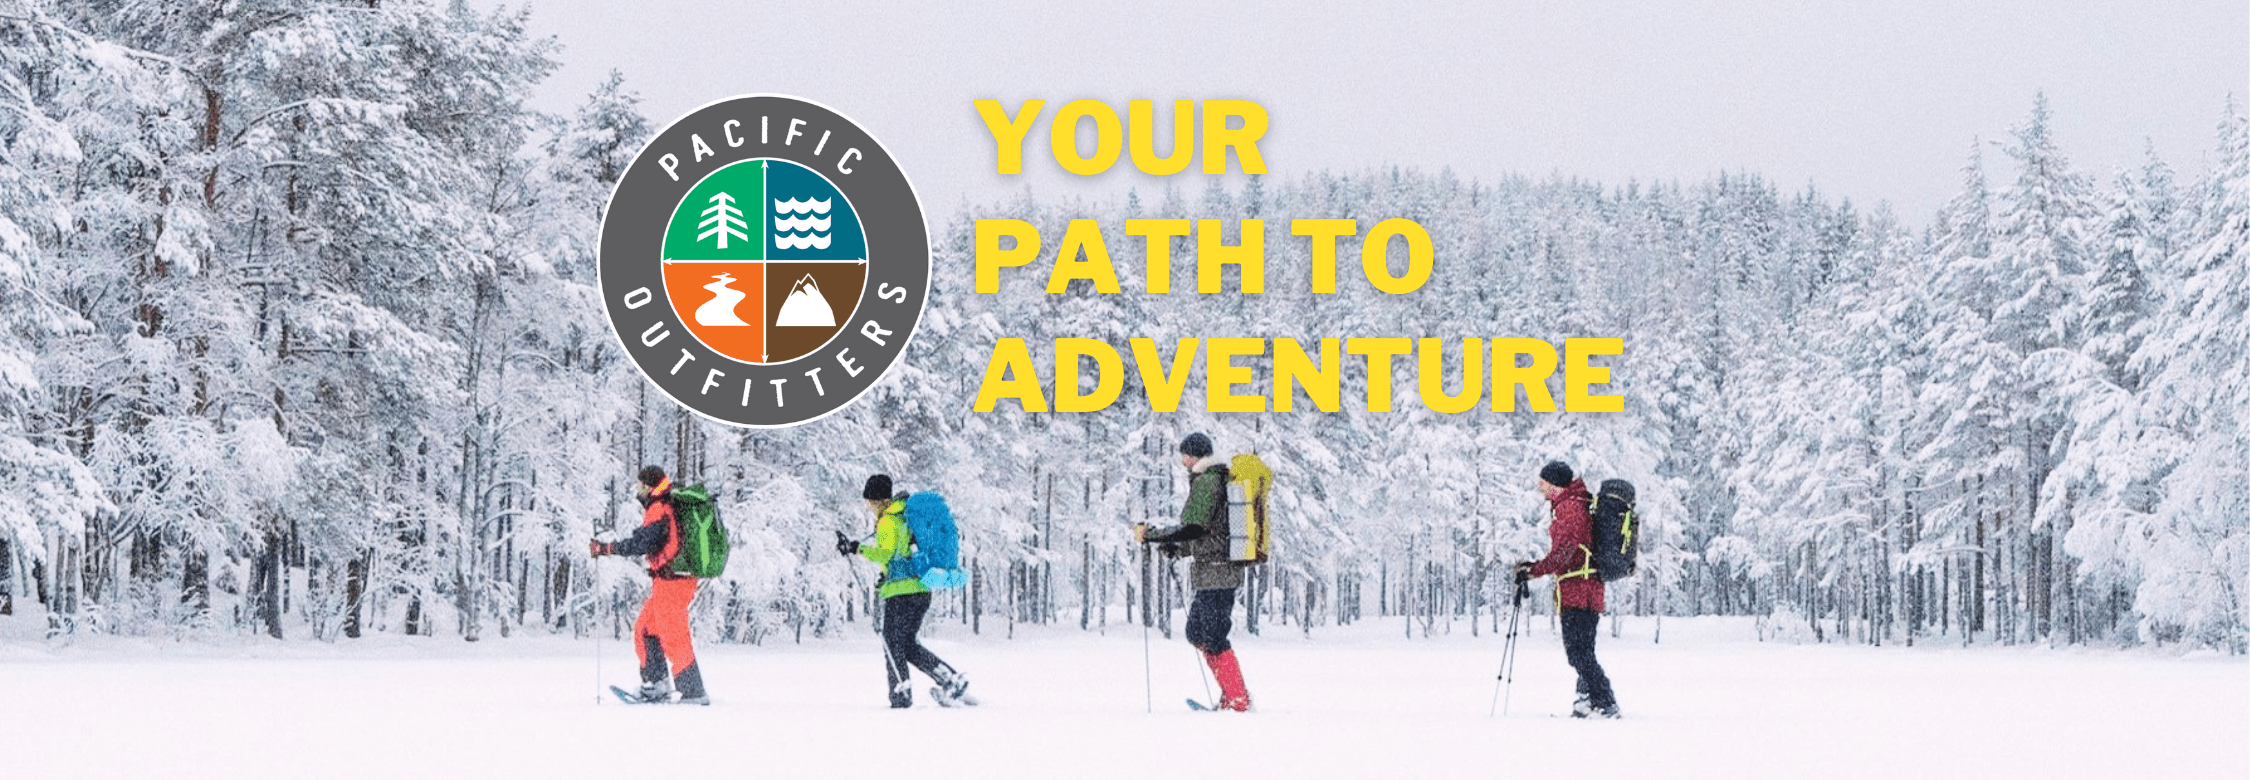 Pacific Outfitters Your Path to Adventure